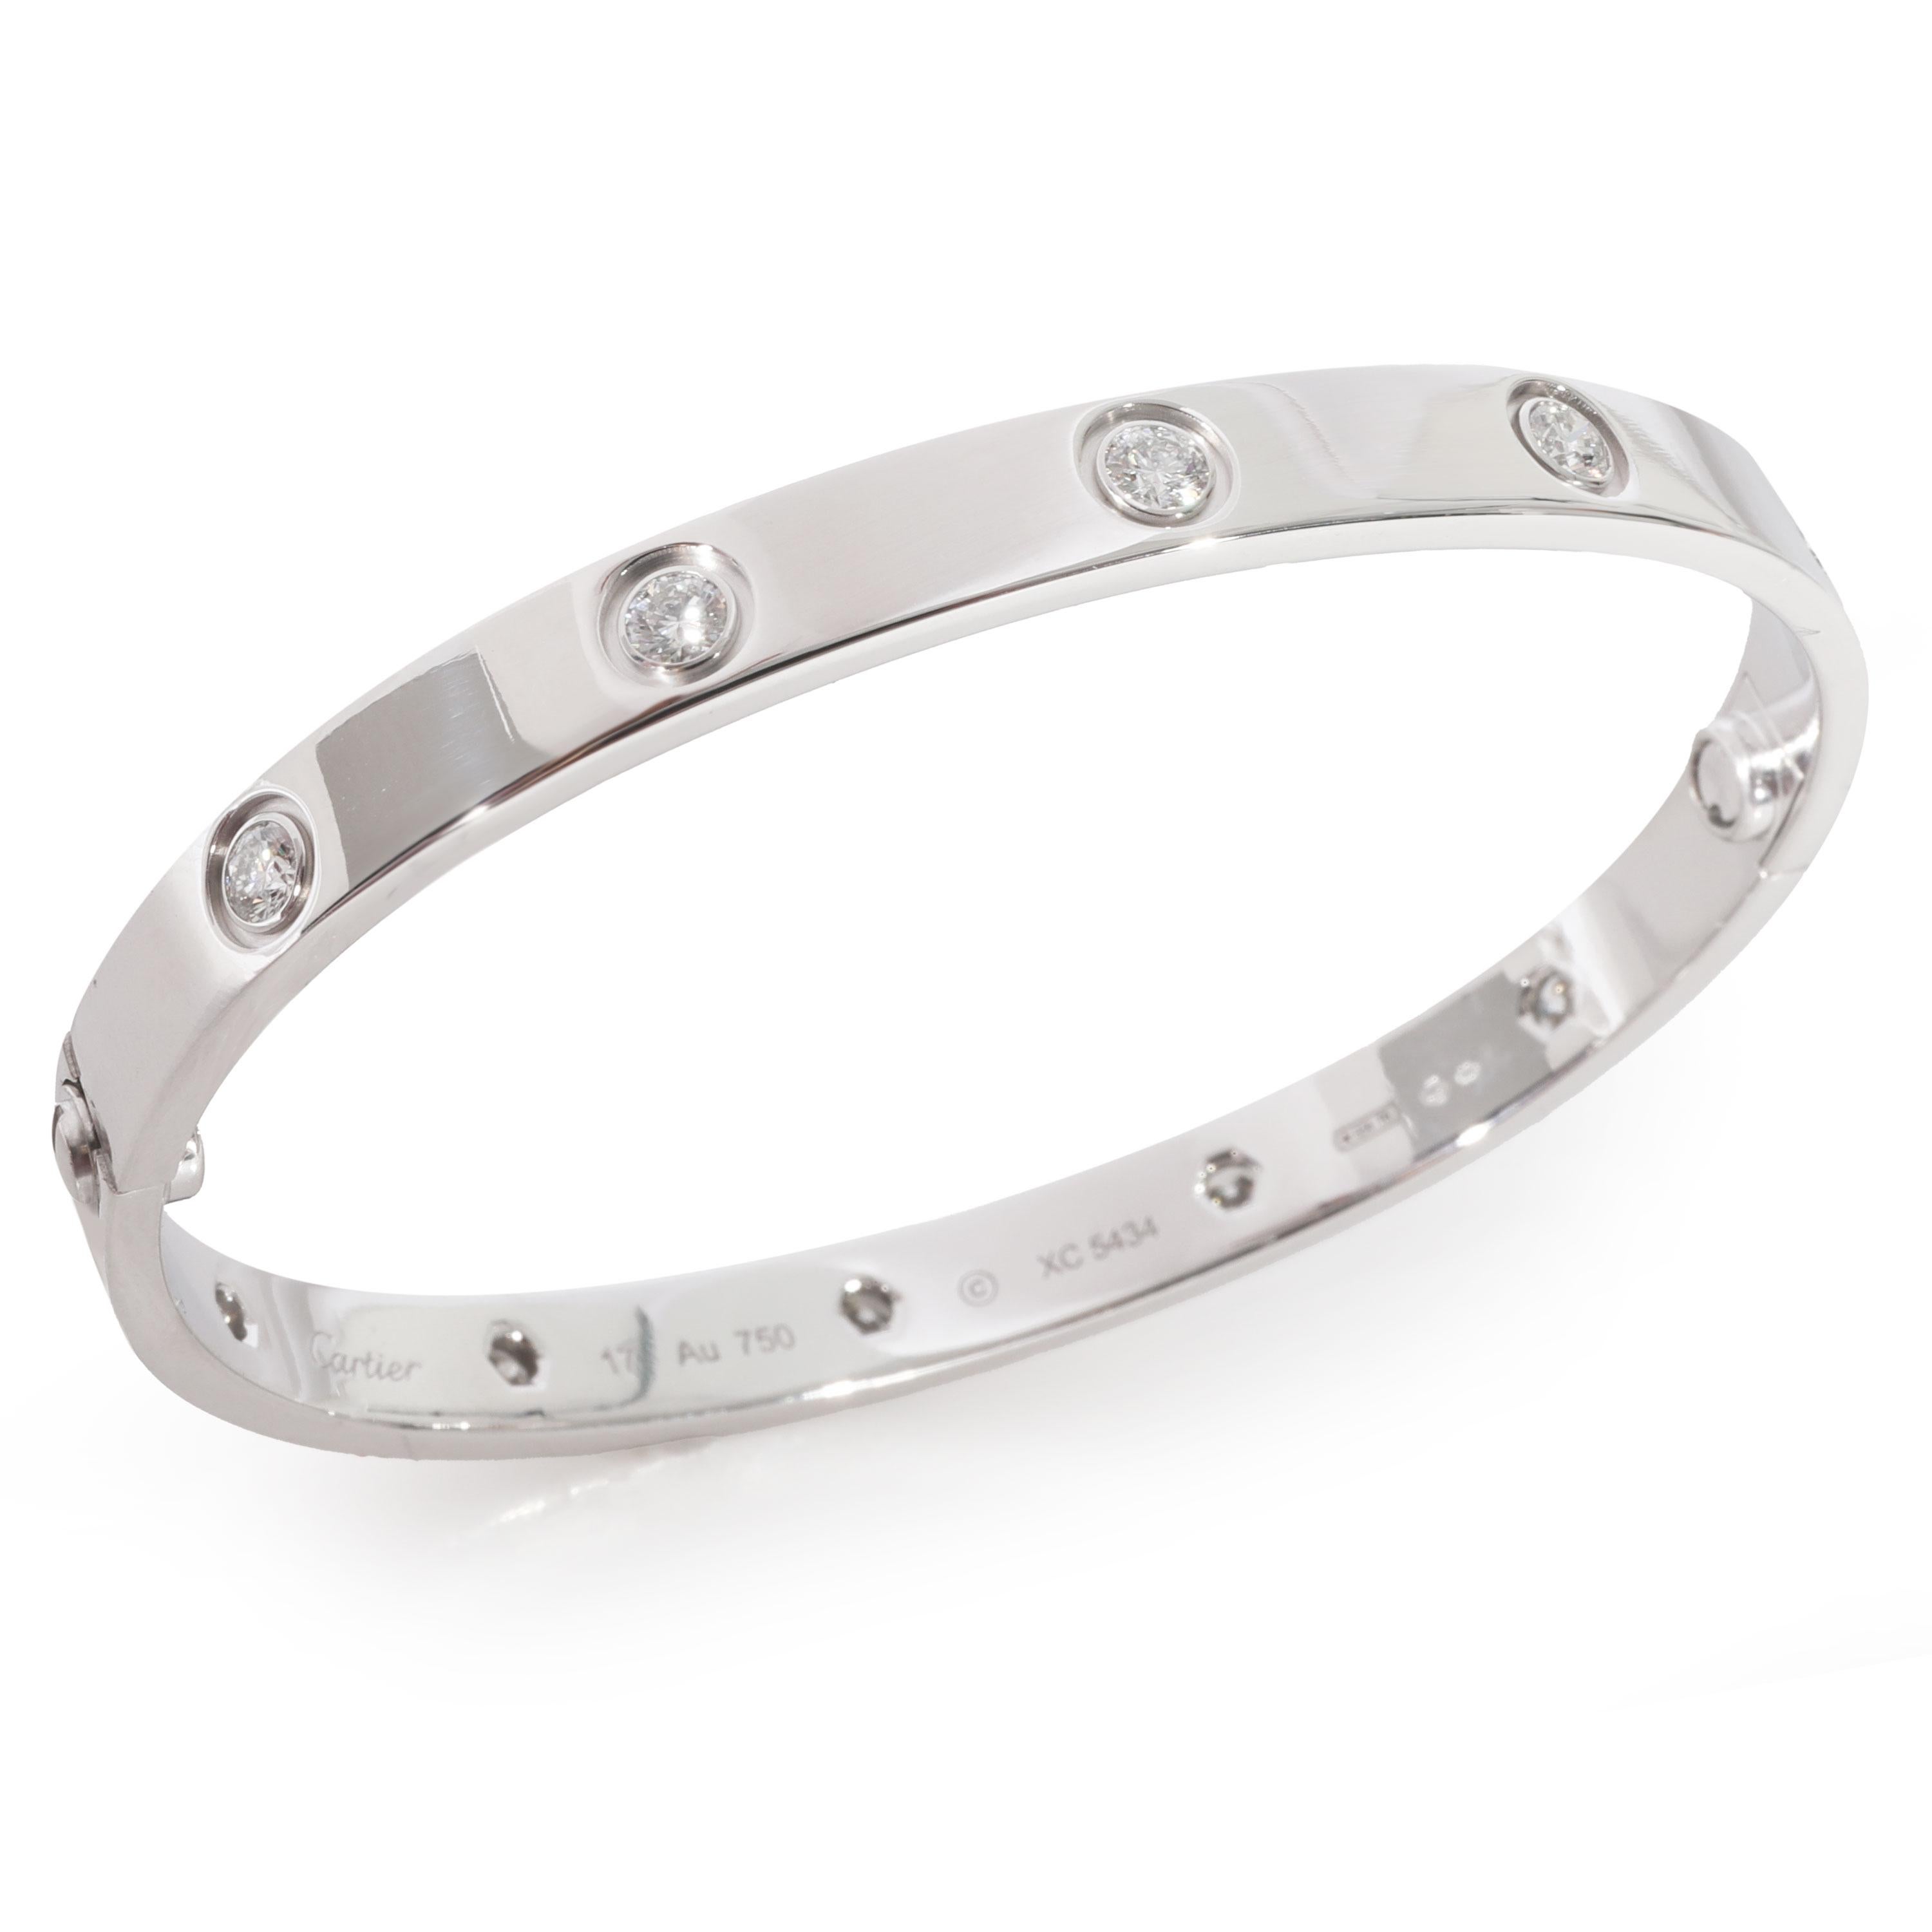 Cartier Love Diamond Bracelet in 18k White Gold 0.96 CTW

PRIMARY DETAILS
SKU: 127234
Listing Title: Cartier Love Diamond Bracelet in 18k White Gold 0.96 CTW
Condition Description: Retails for 17,200 USD. In excellent condition and recently